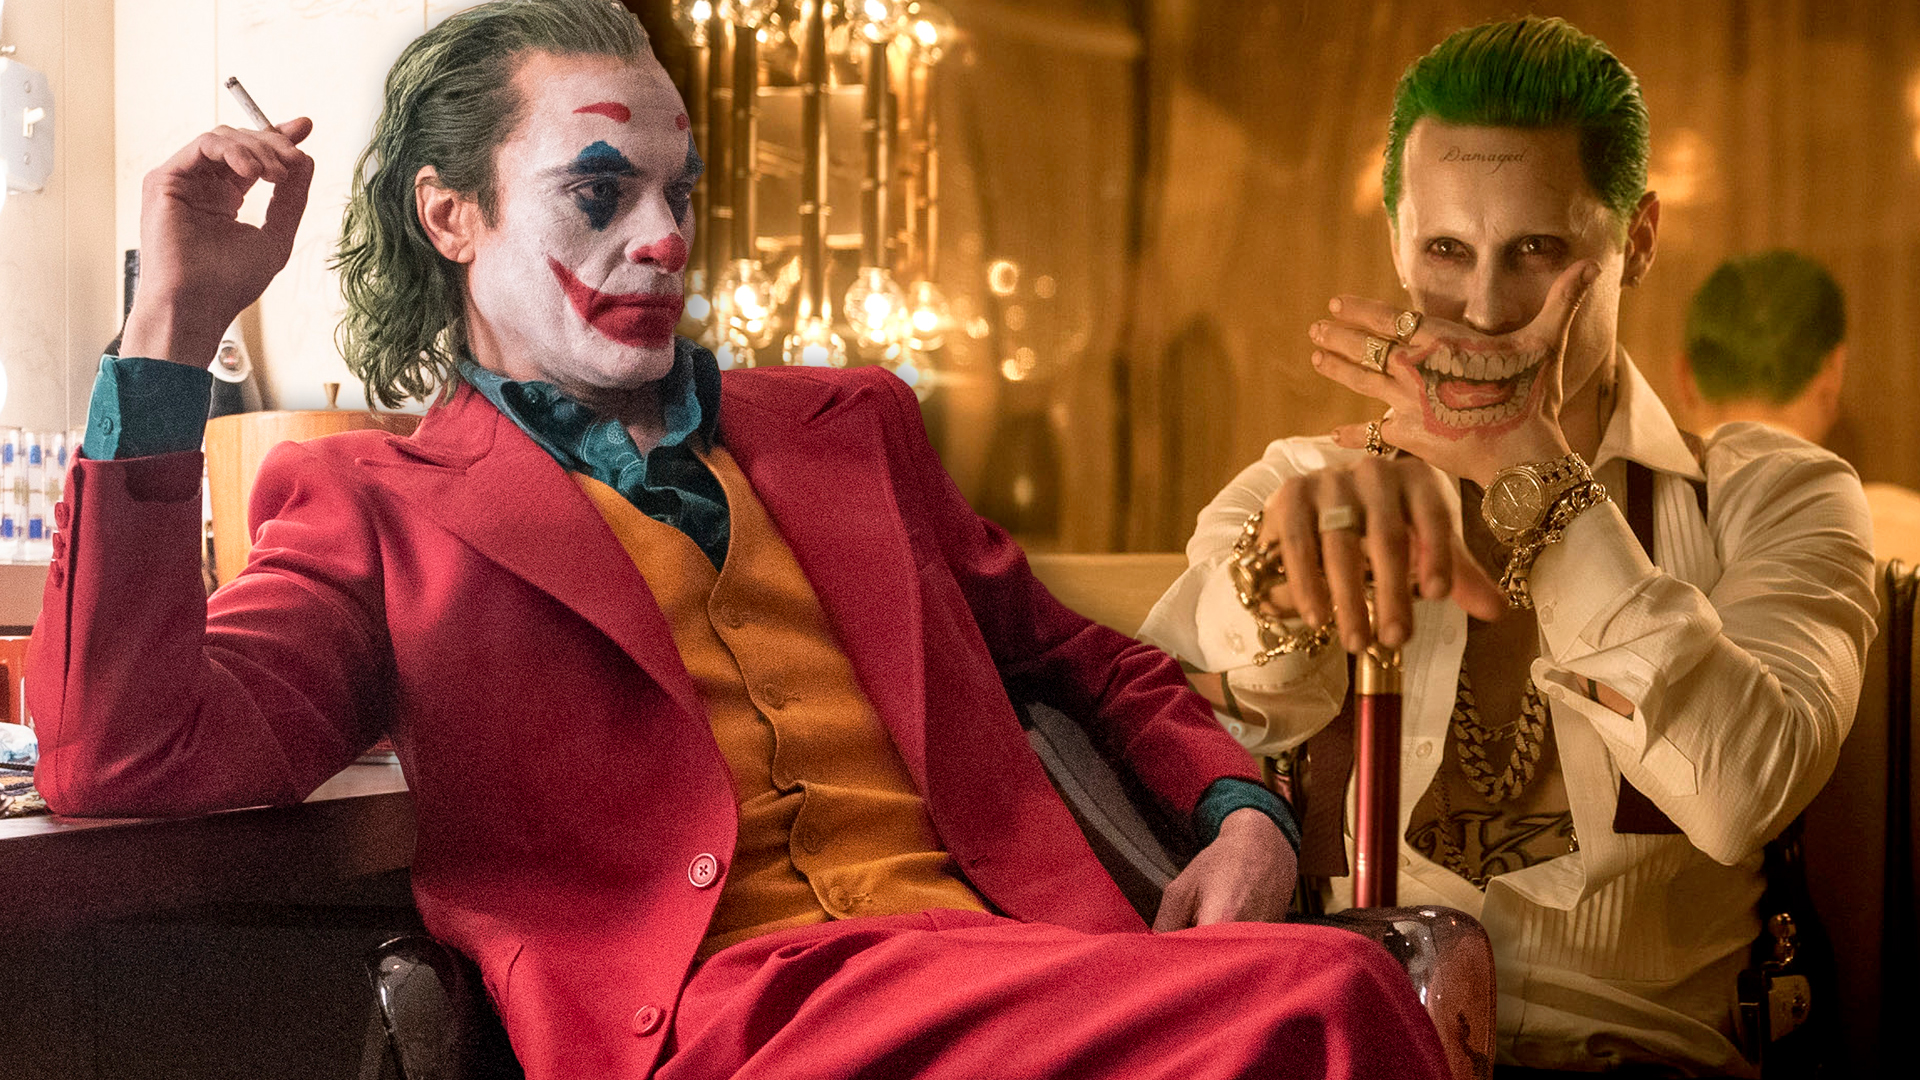 All 8 Joker Actors Ranked from Meh to Iconic (You Already Know Who's at #1)